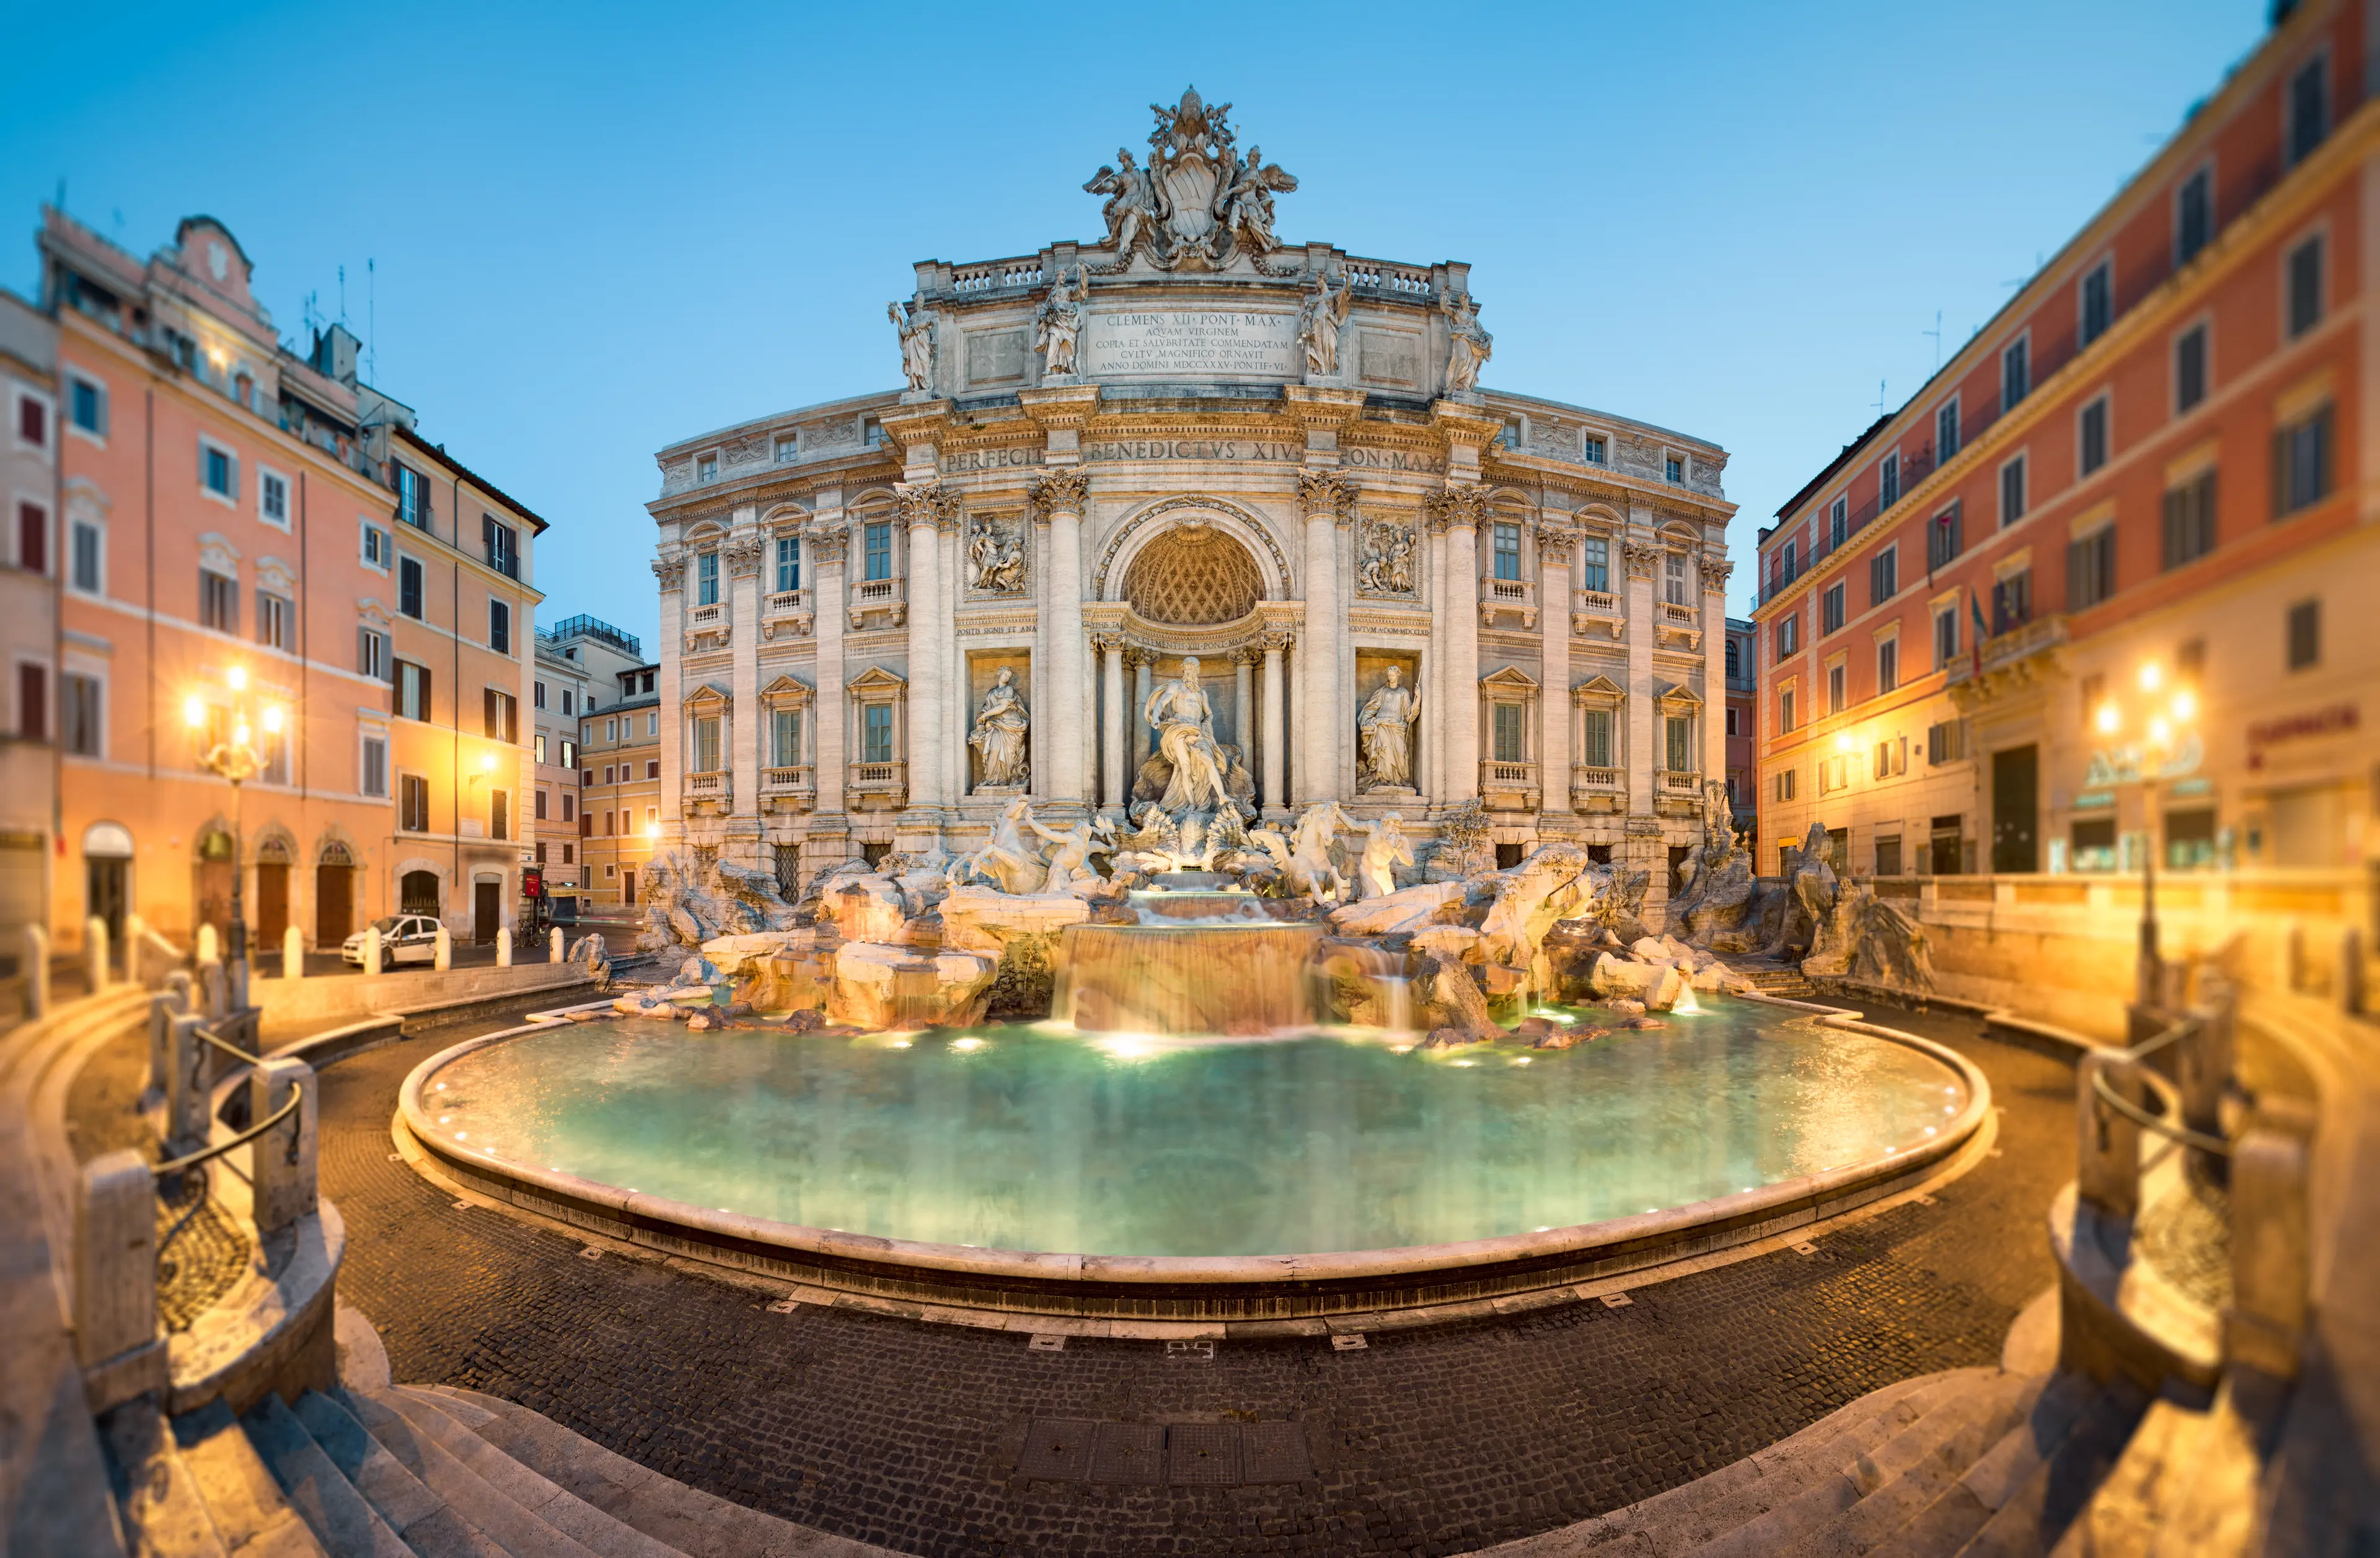 4-Day Rome Adventure: Explore Hidden Gems and Local Delights with Friends